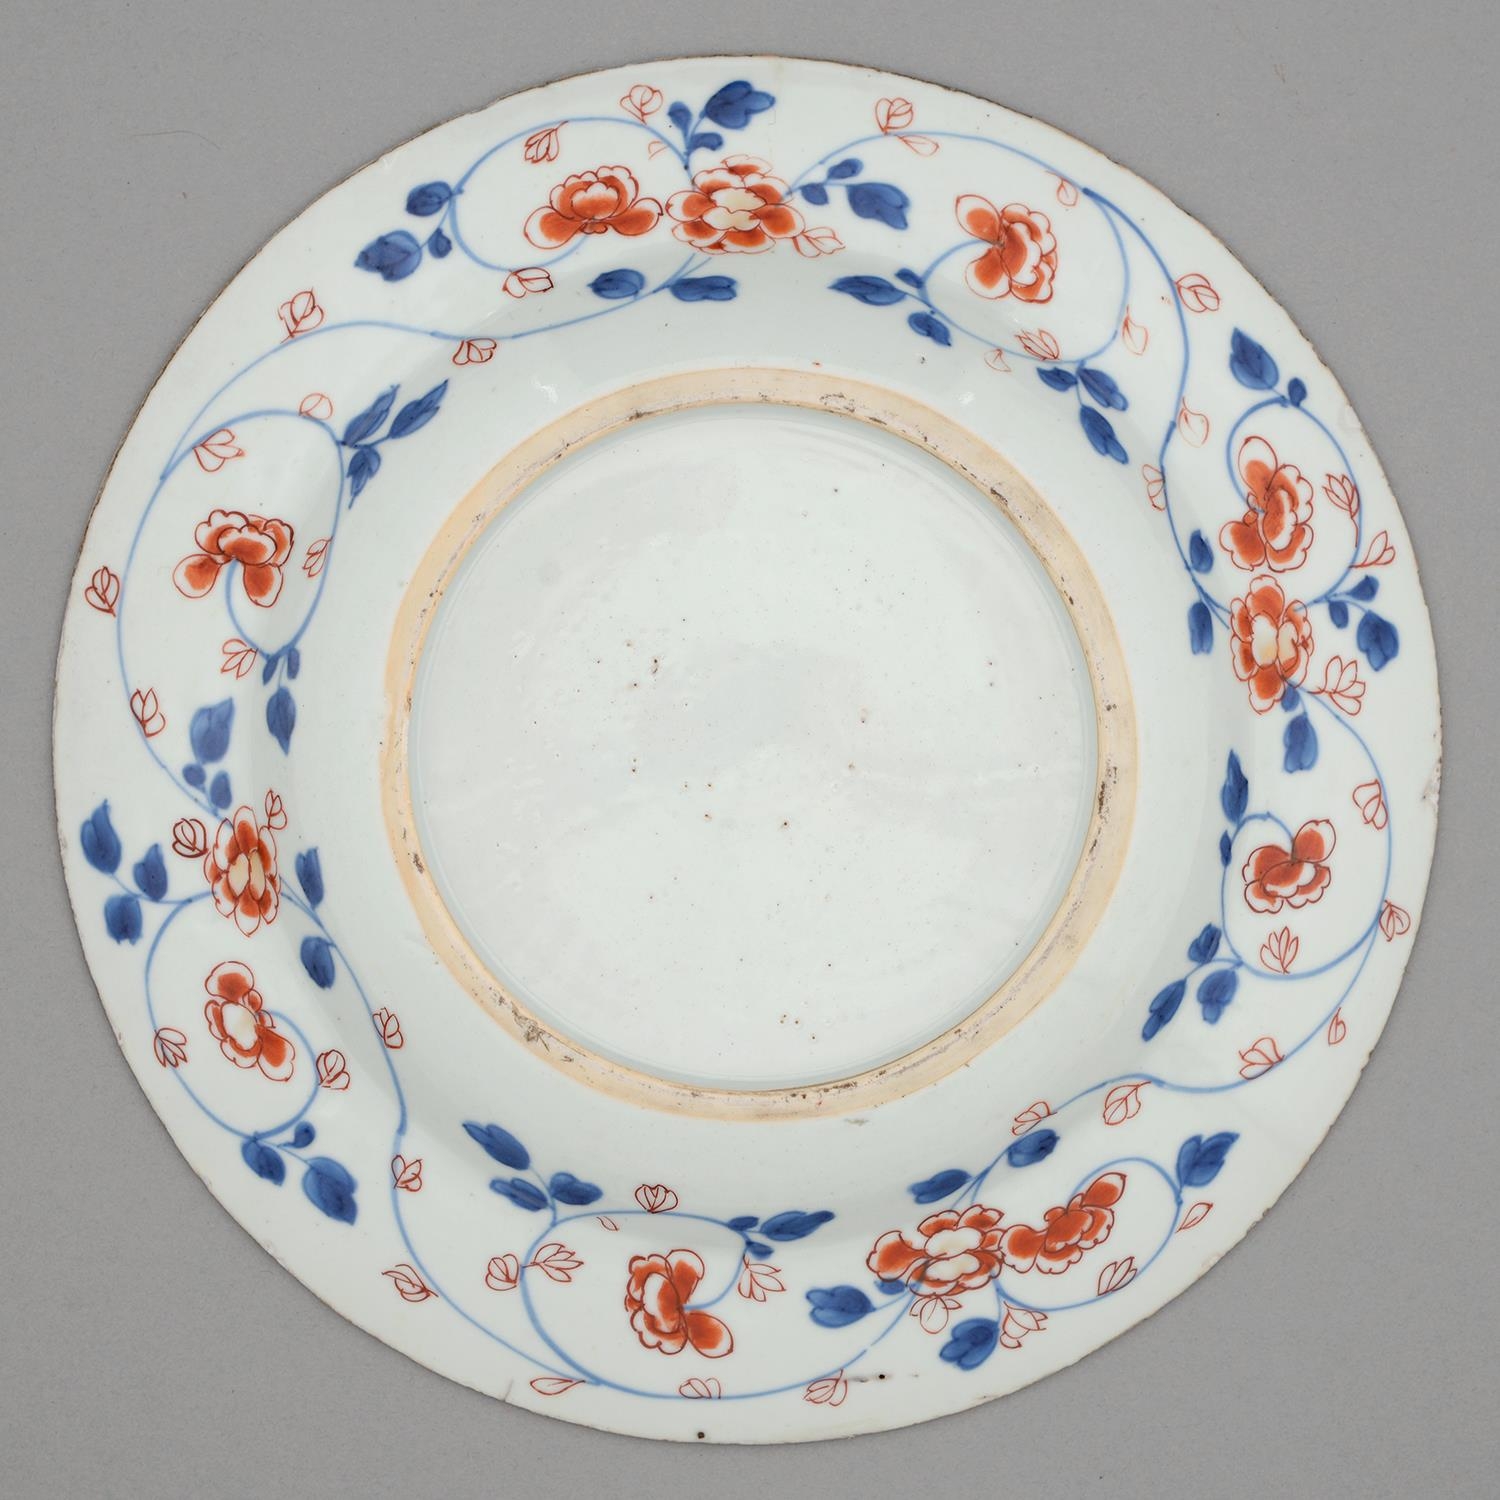 A Chinese Imari plate, 18th c, painted with three clumps of flowering plants bordered by trailing - Image 2 of 2